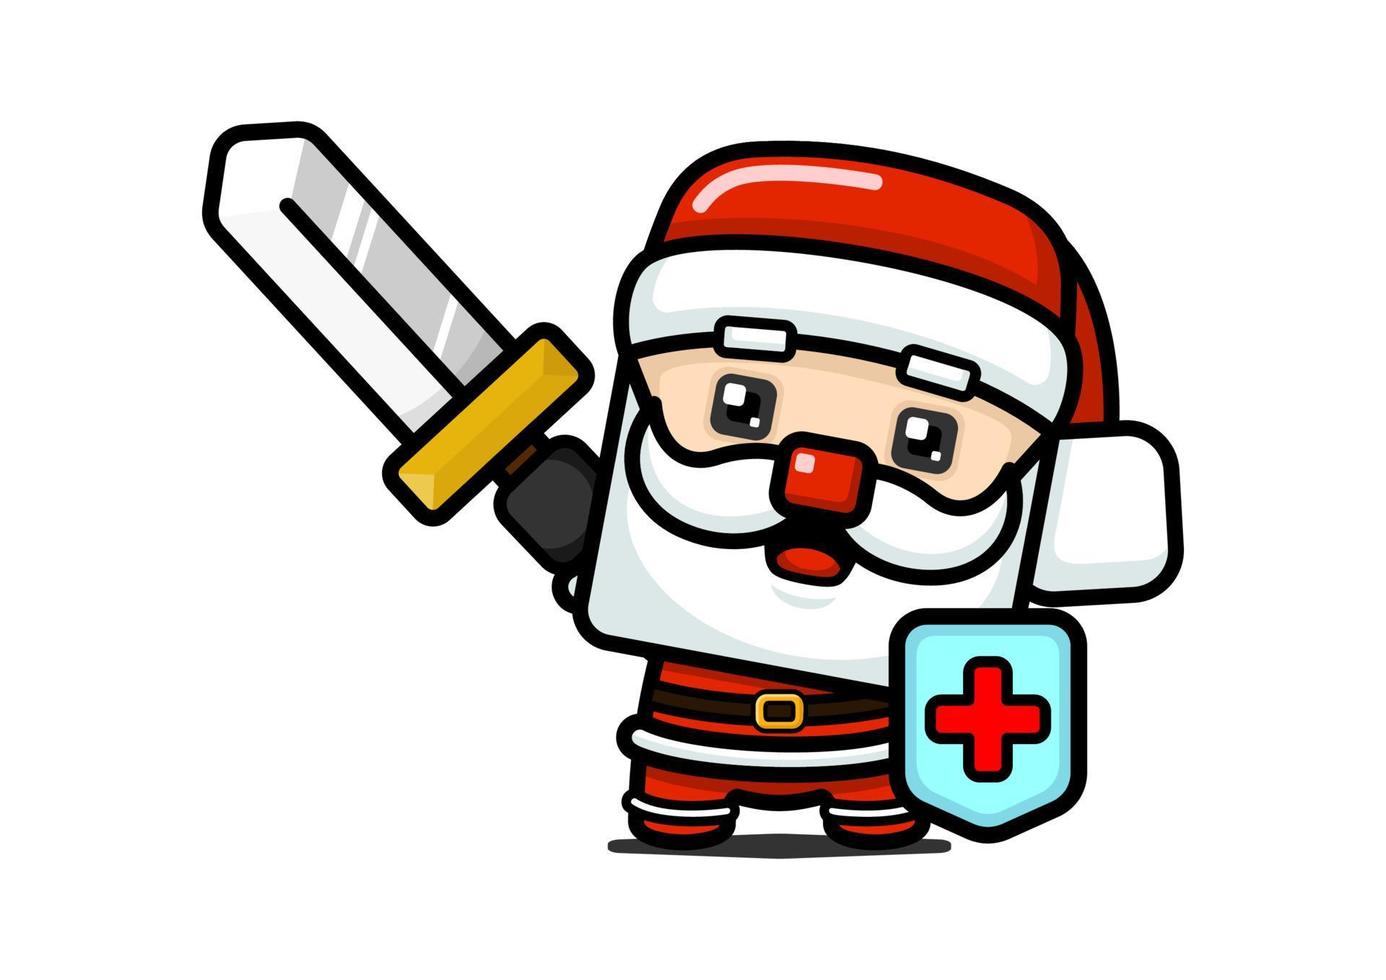 Cube Style Cute Santa Claus Holding Sword And Shield vector